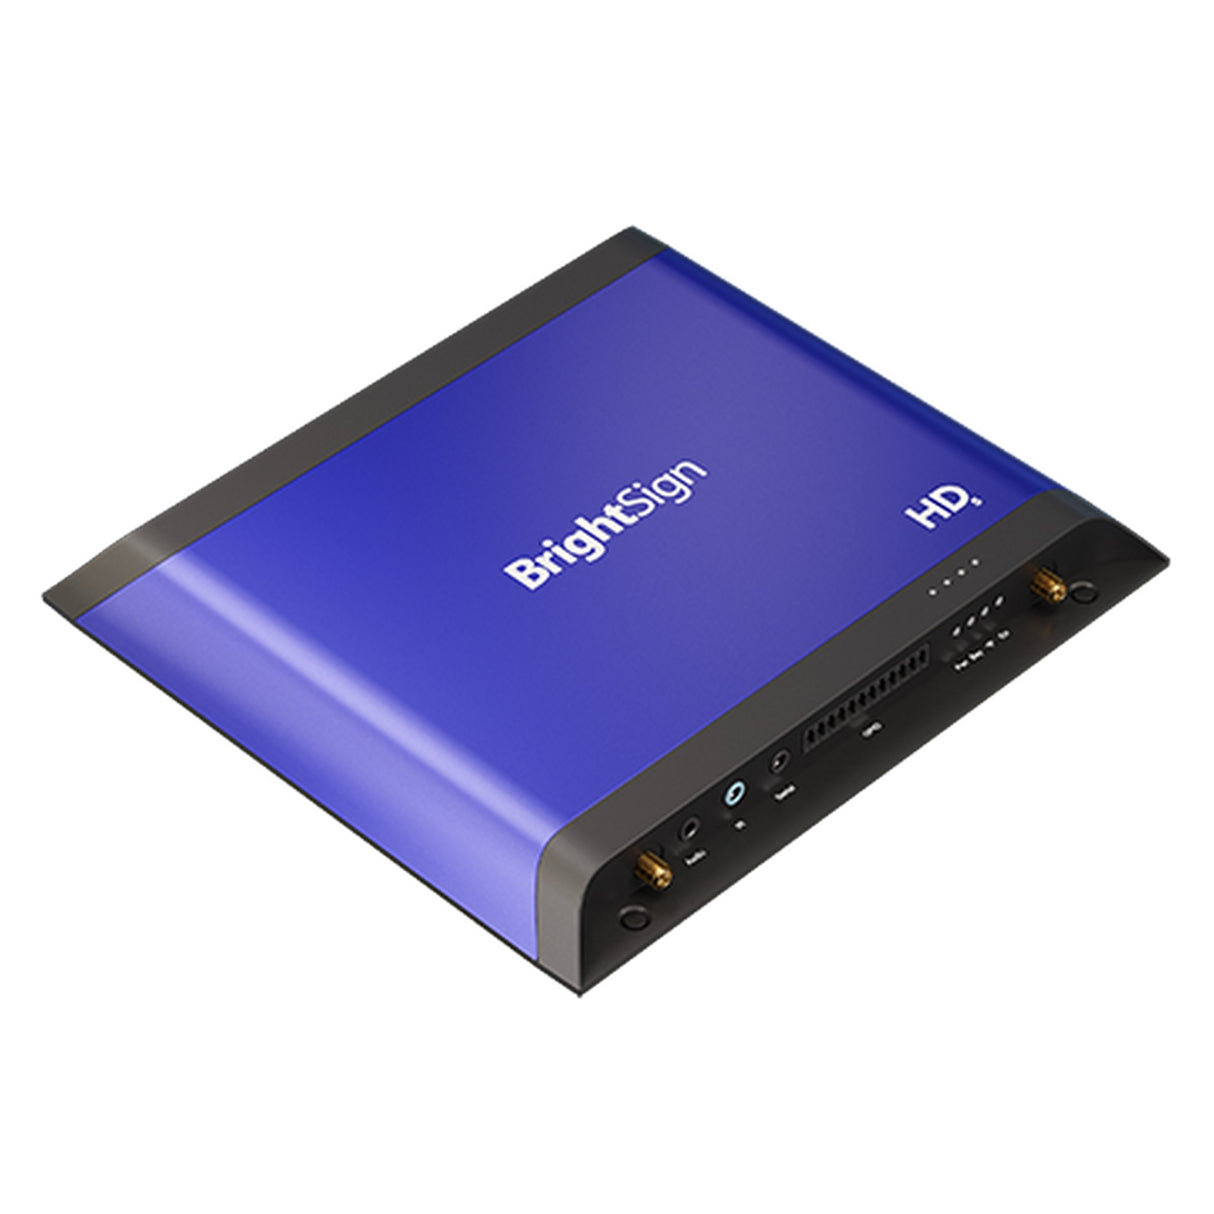 BrightSign HD1025 4K60p/HDR10 Expanded Digital Signage I/O Player